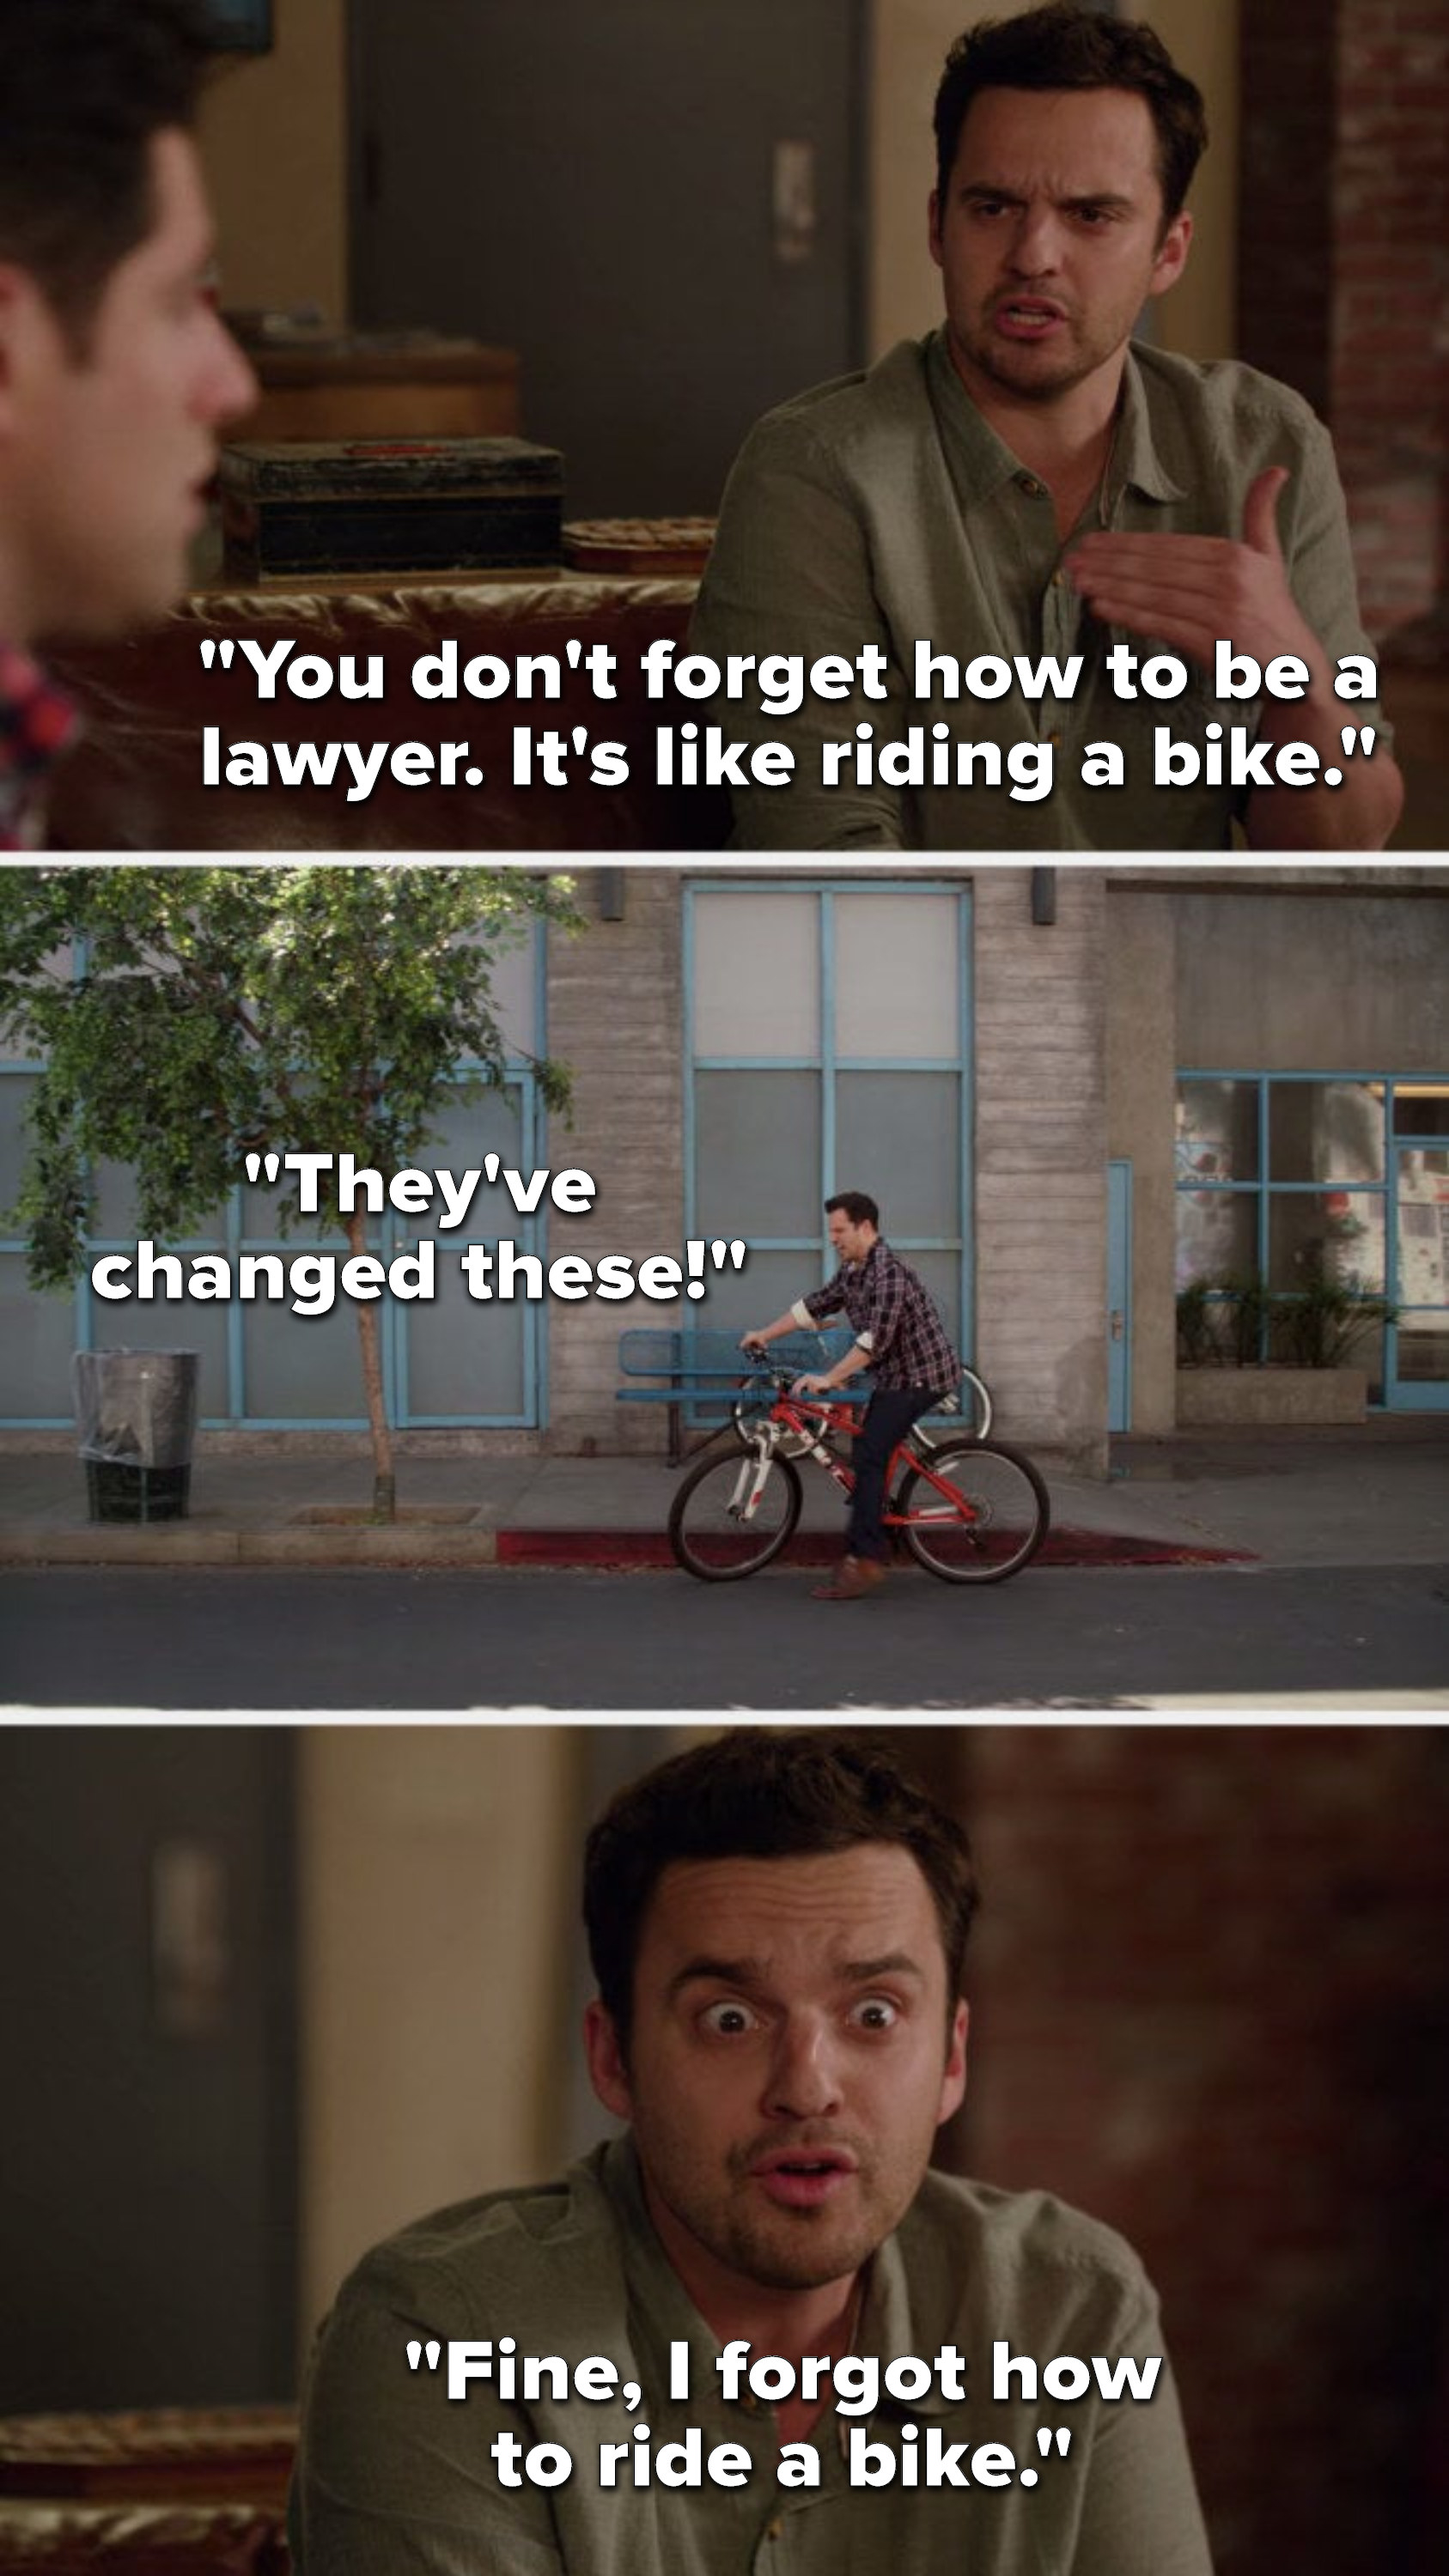 Nick says, You don&#x27;t forget how to be a lawyer, it&#x27;s like riding a bike, flashback to him unable to ride and bike and he says They&#x27;ve changed these, then Nick says, Fine, I forgot how to ride a bike